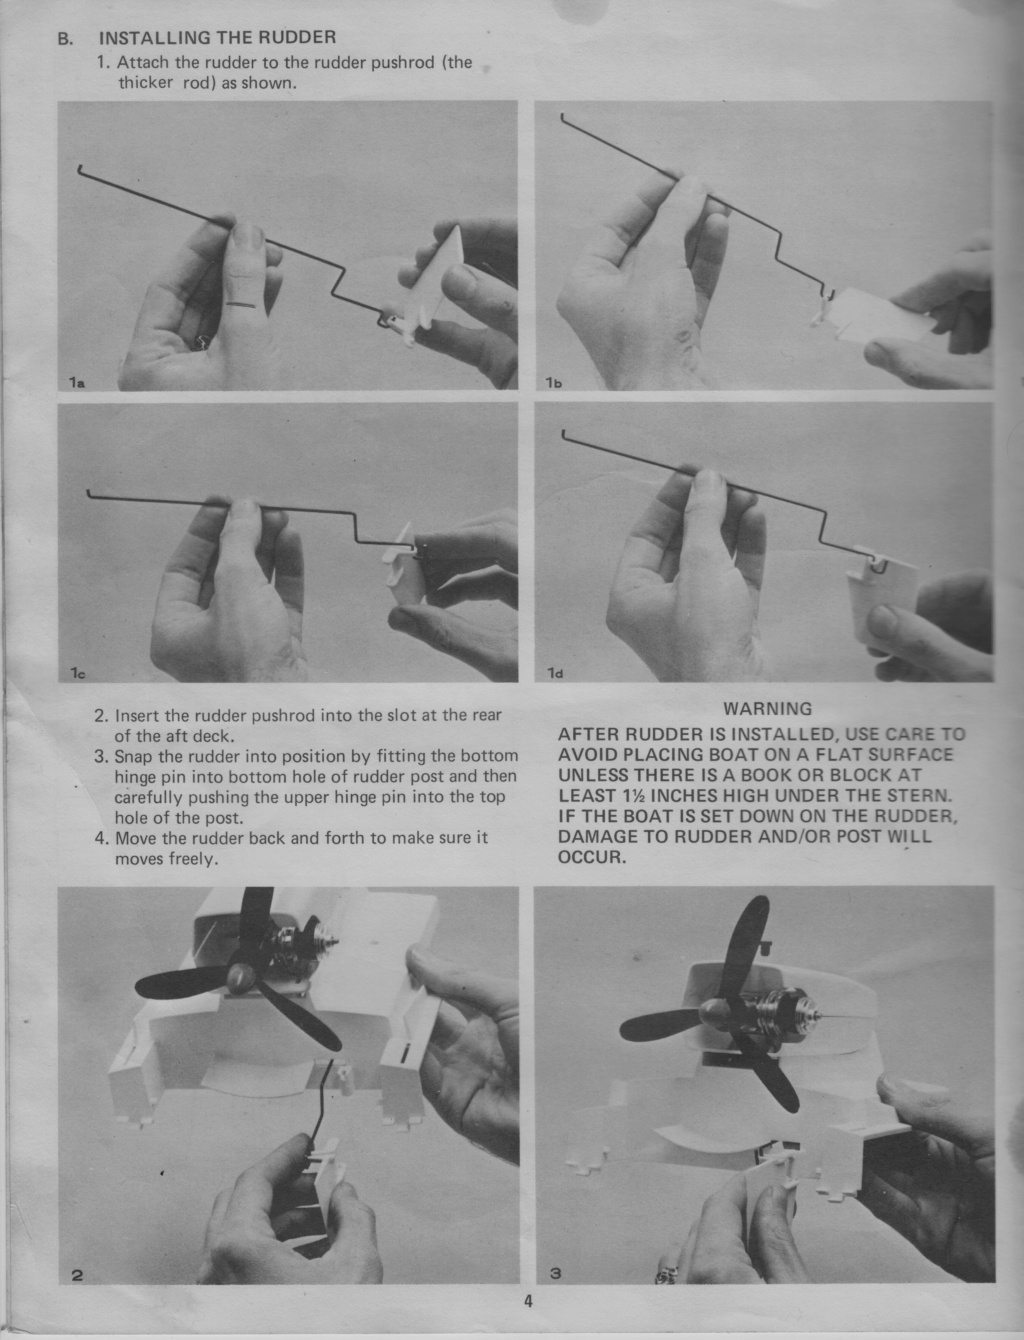 Hydro Blaster pictures and manual scans . Hydro_15